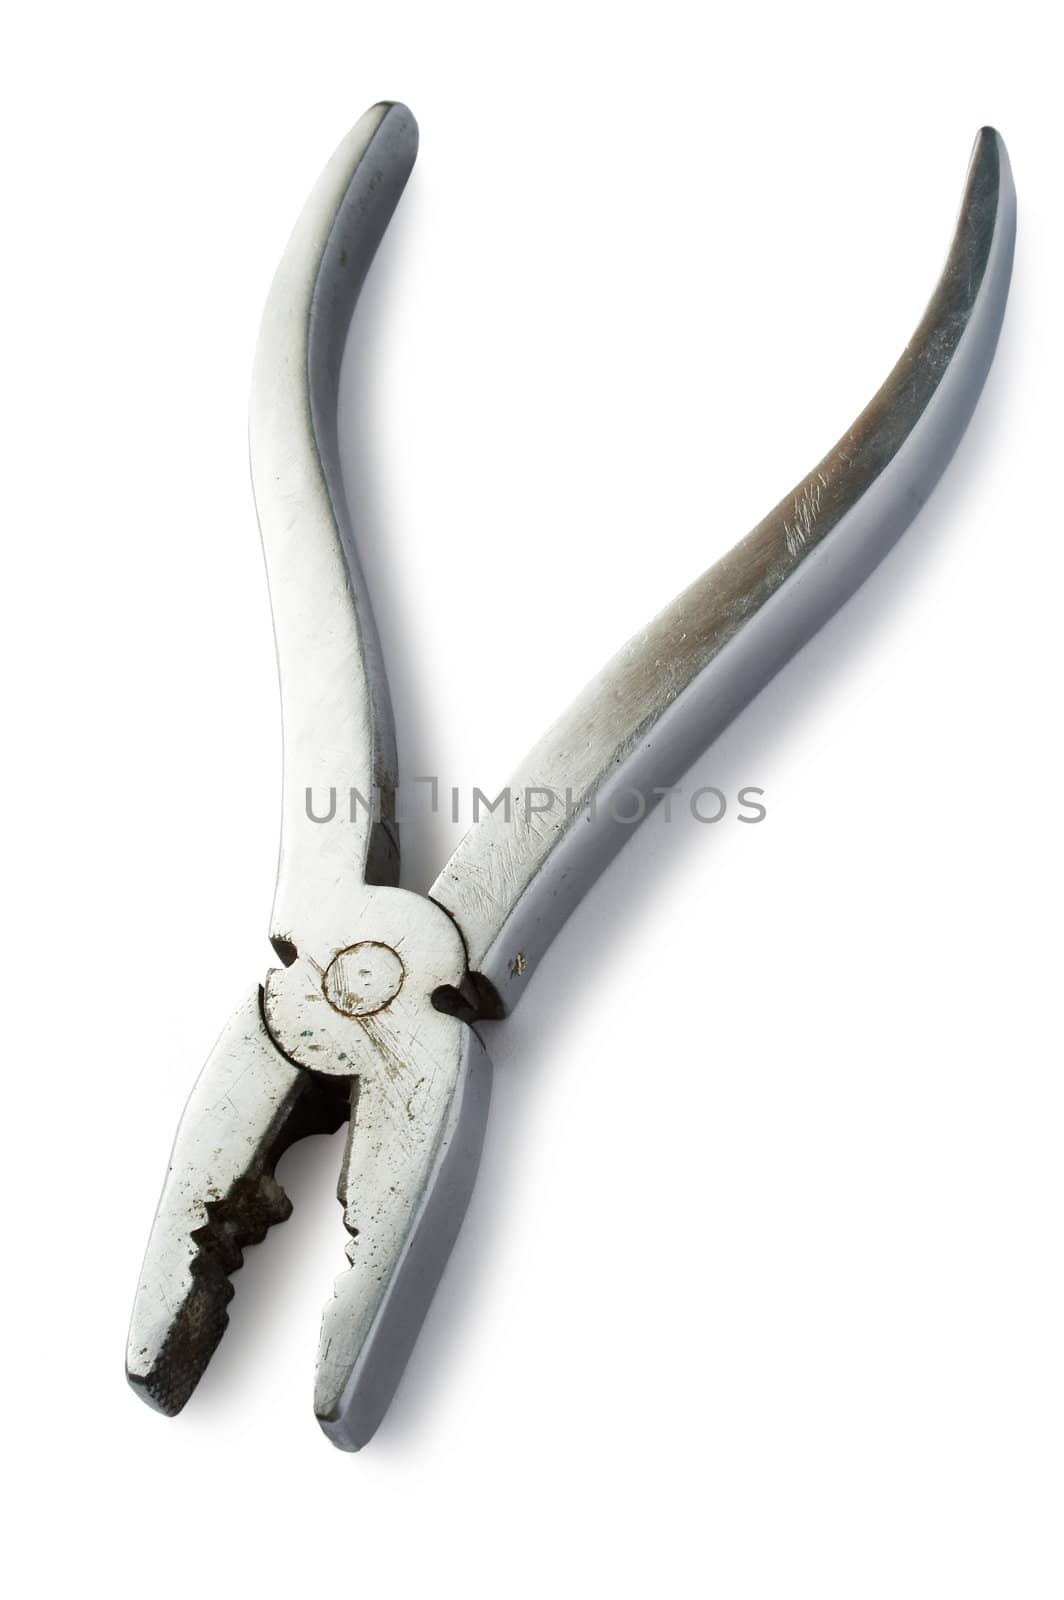 old pliers by terex